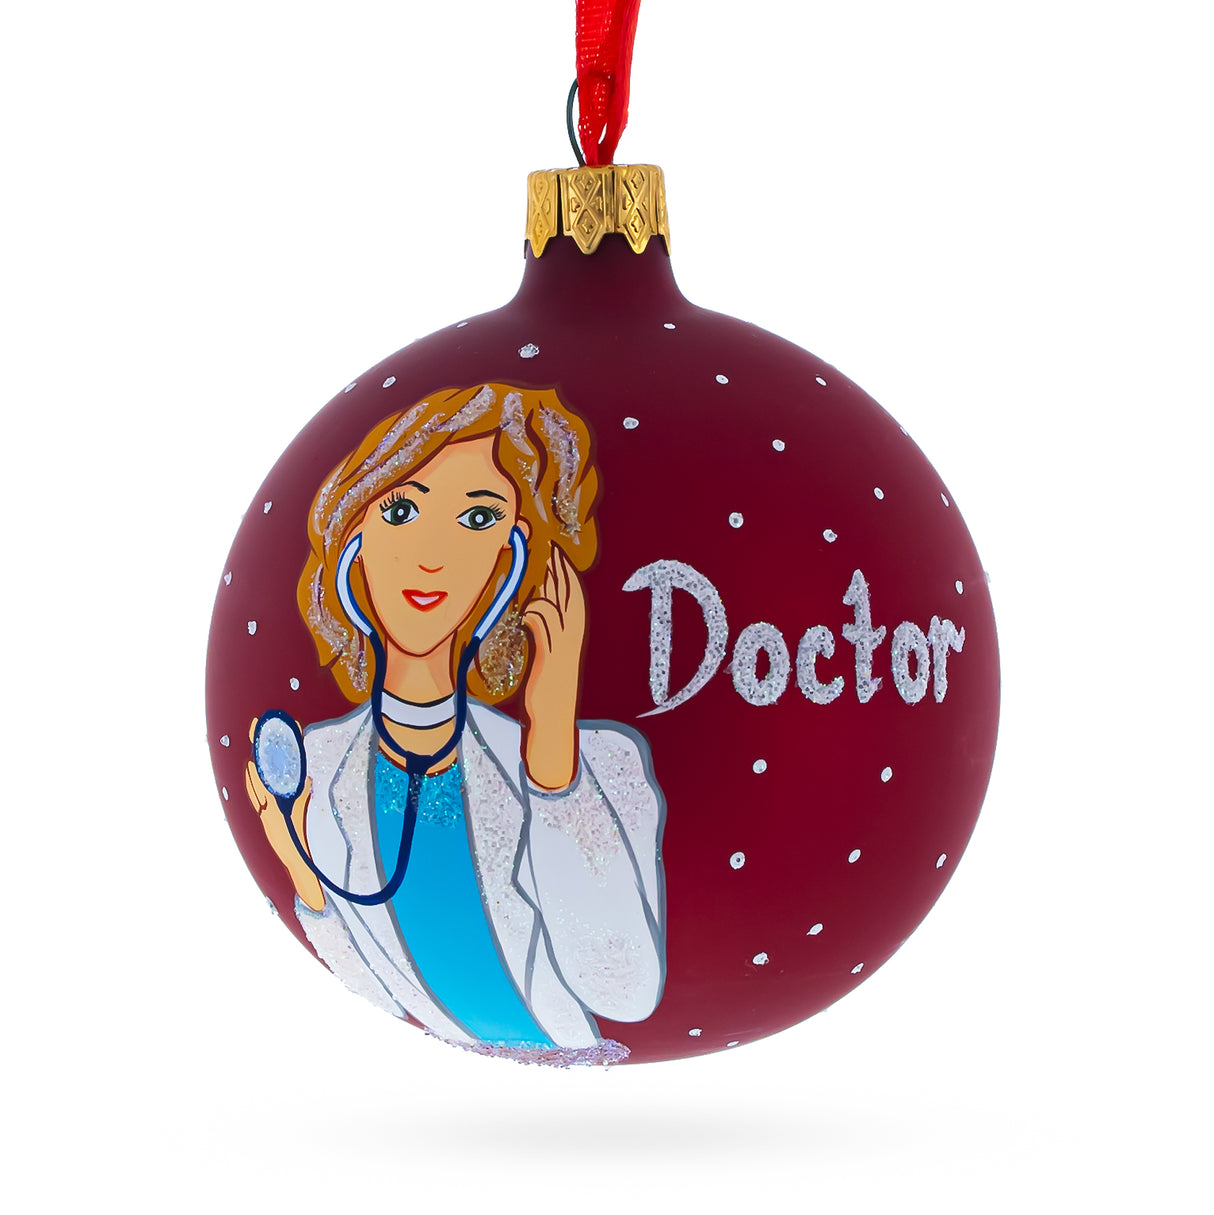 Caring Doctor with Stethoscope Blown Glass Ball Christmas Ornament 3.25 Inches in Red color, Round shape